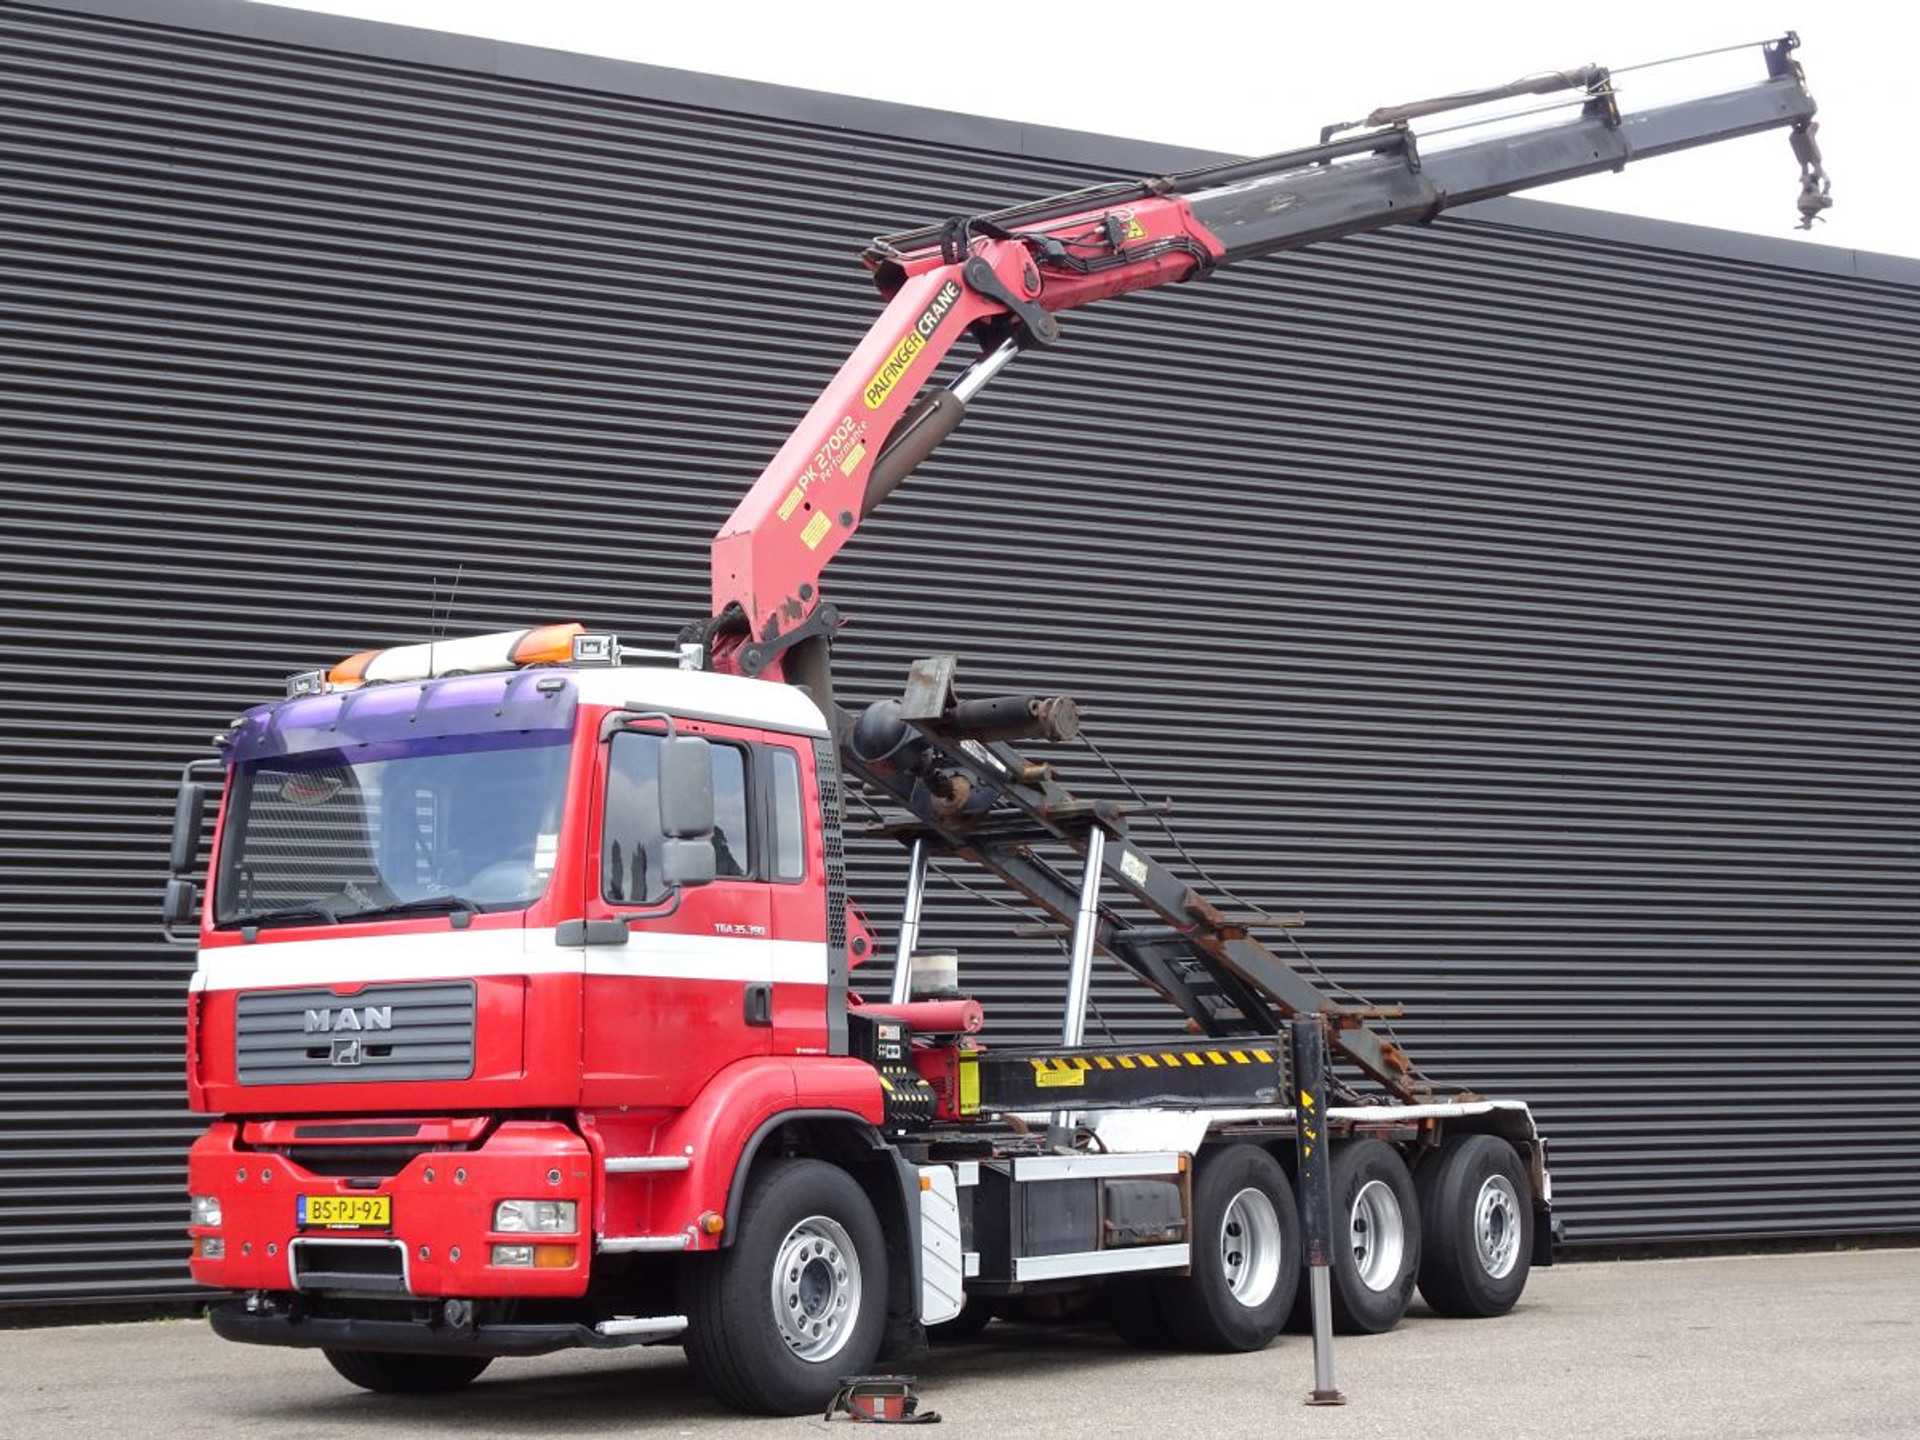 MAN TGA 35.390 / 8x4-4 / PALFINGER 27 t/m / NCH 2025 CONTAINER SYSTEM